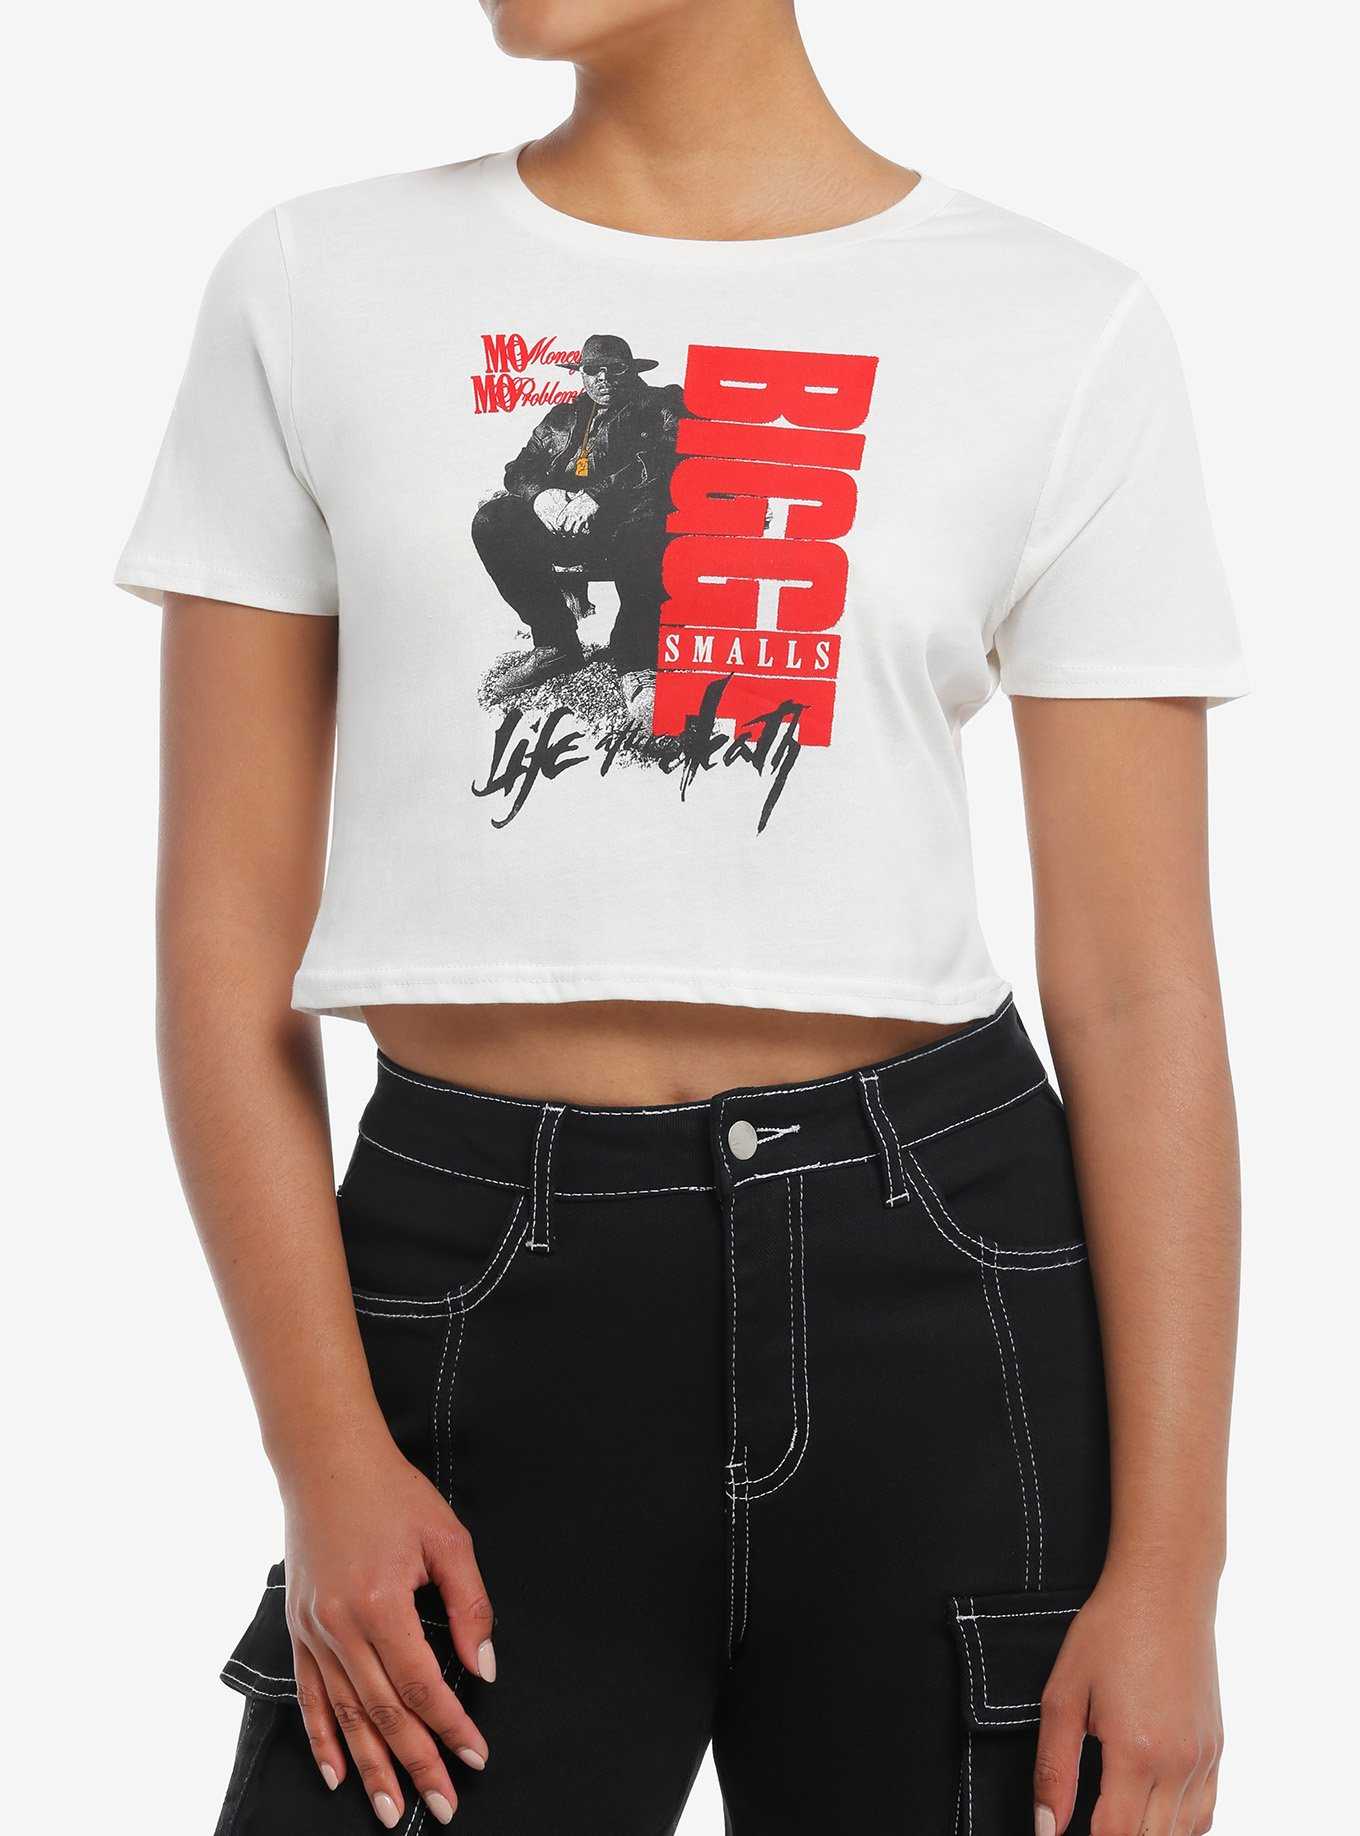 The Notorious B.I.G. Life After Death Girls Baby T-Shirt, , hi-res